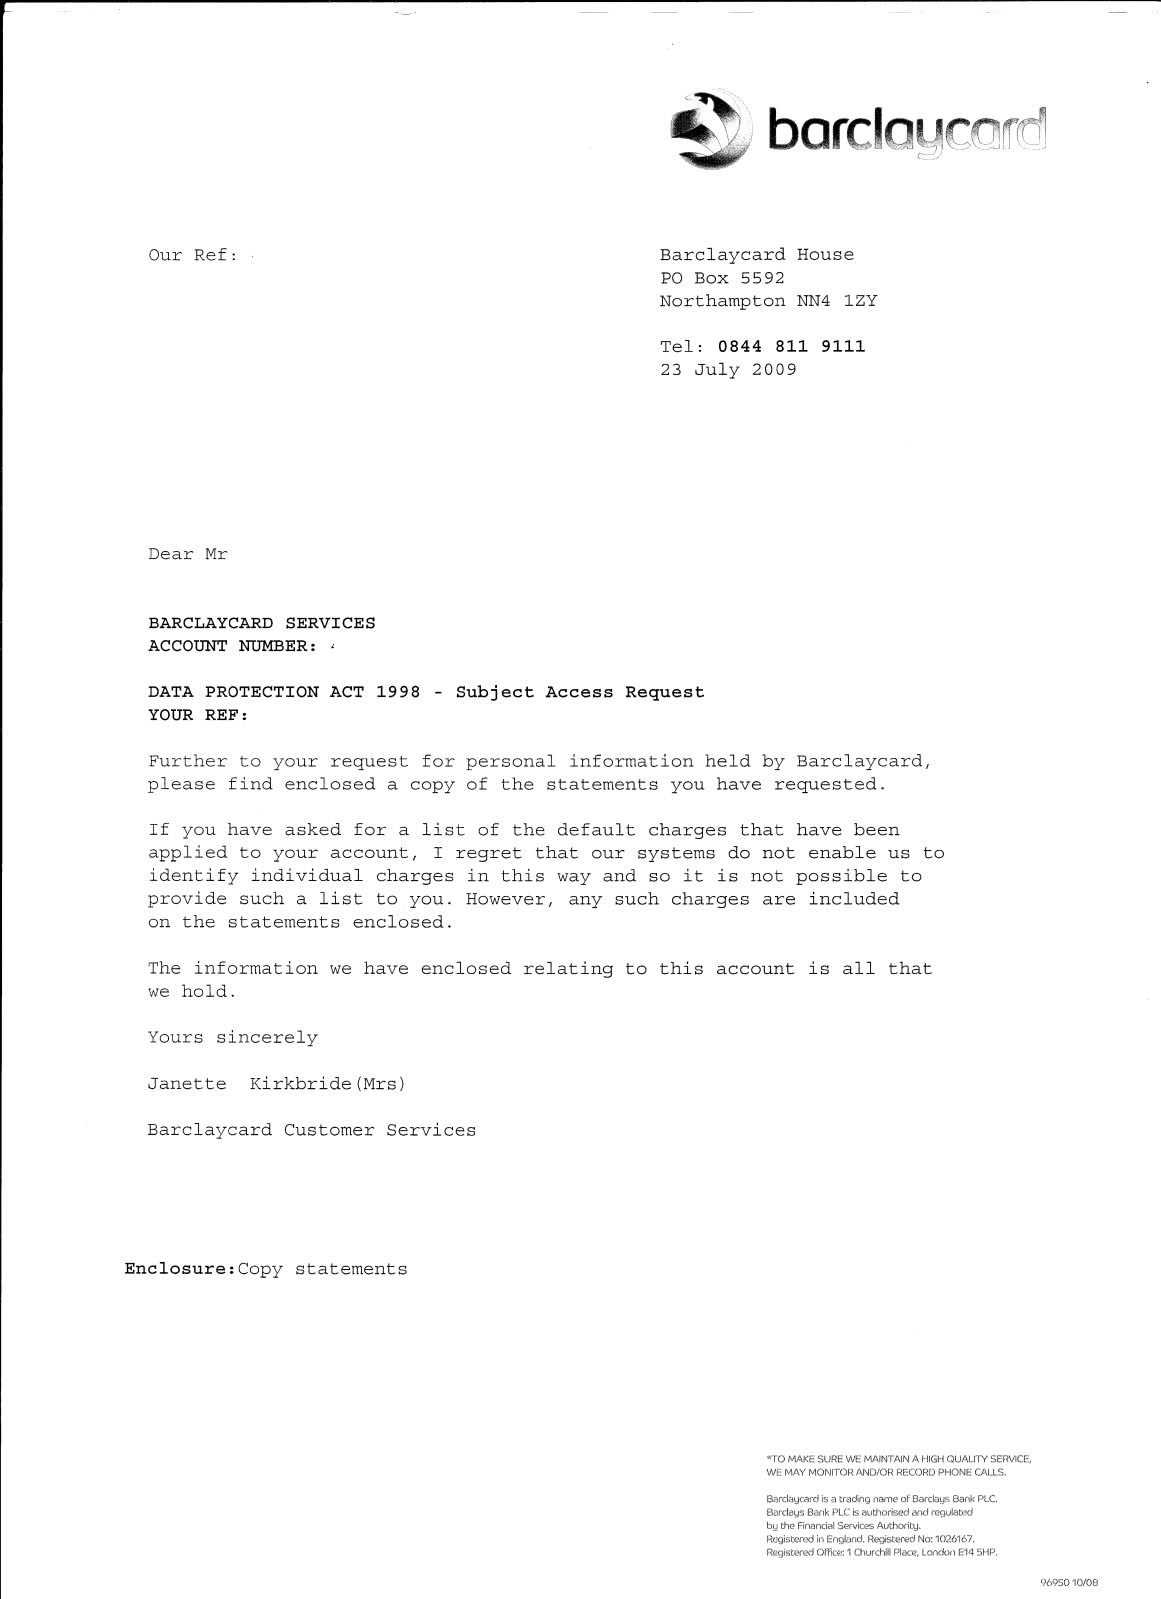 Ppi Claim Letter Template For Credit Card – Atlantaauctionco Intended For Ppi Claim Letter Template For Credit Card